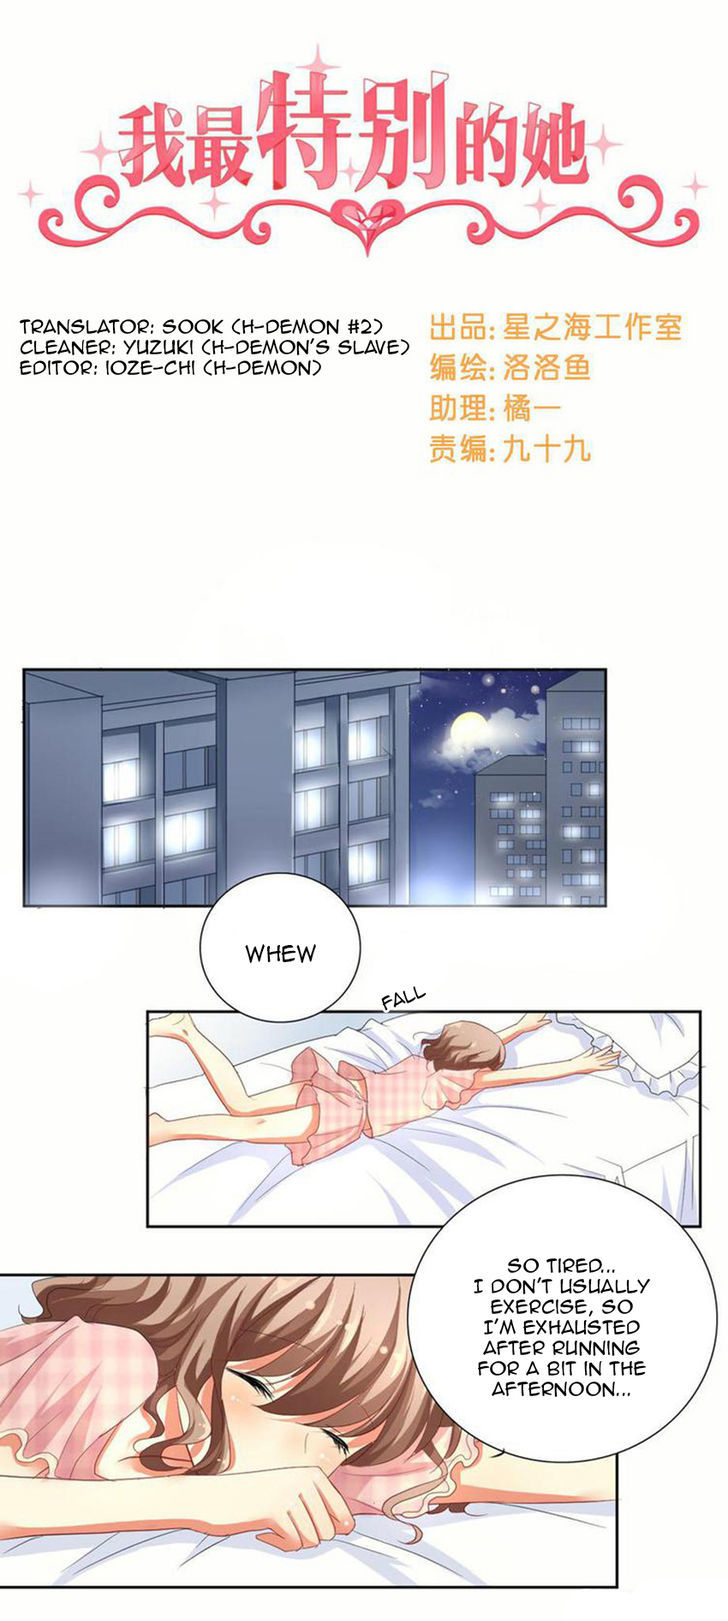 She Who is The Most Special to me - chapter 5 - #1